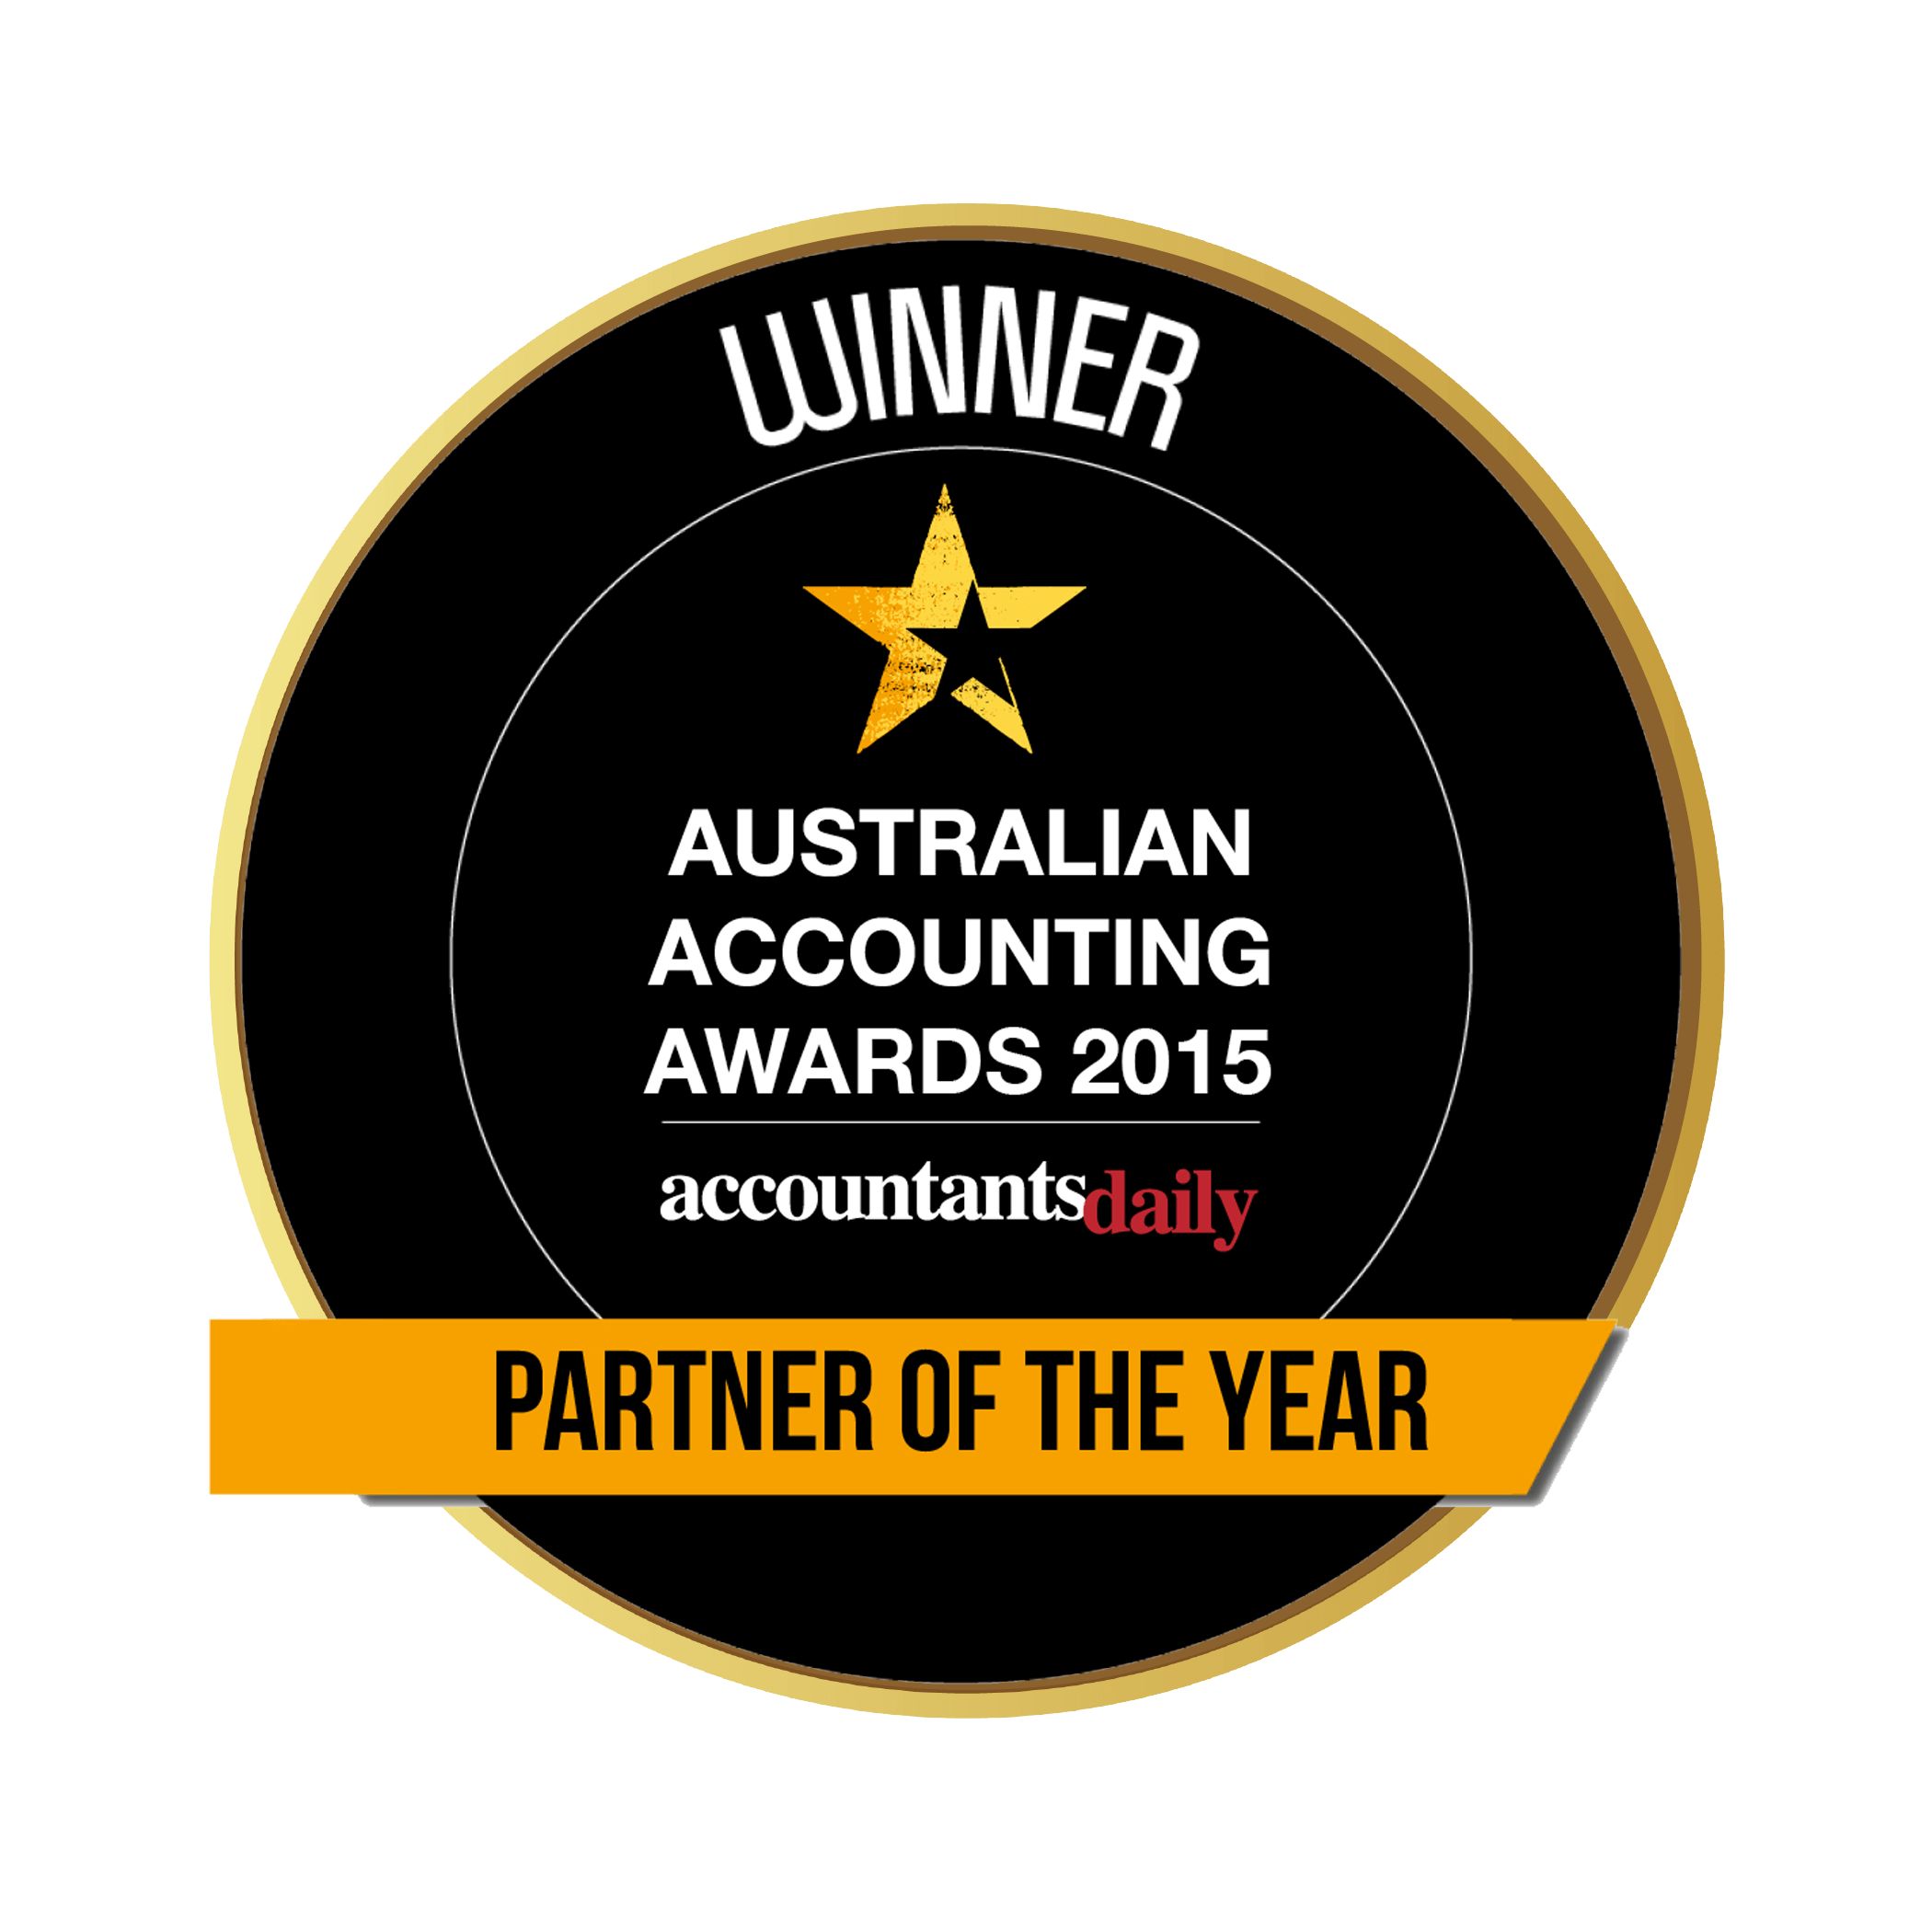 Aust Accounting Awards 2015_PARTNER OF THE YEAR